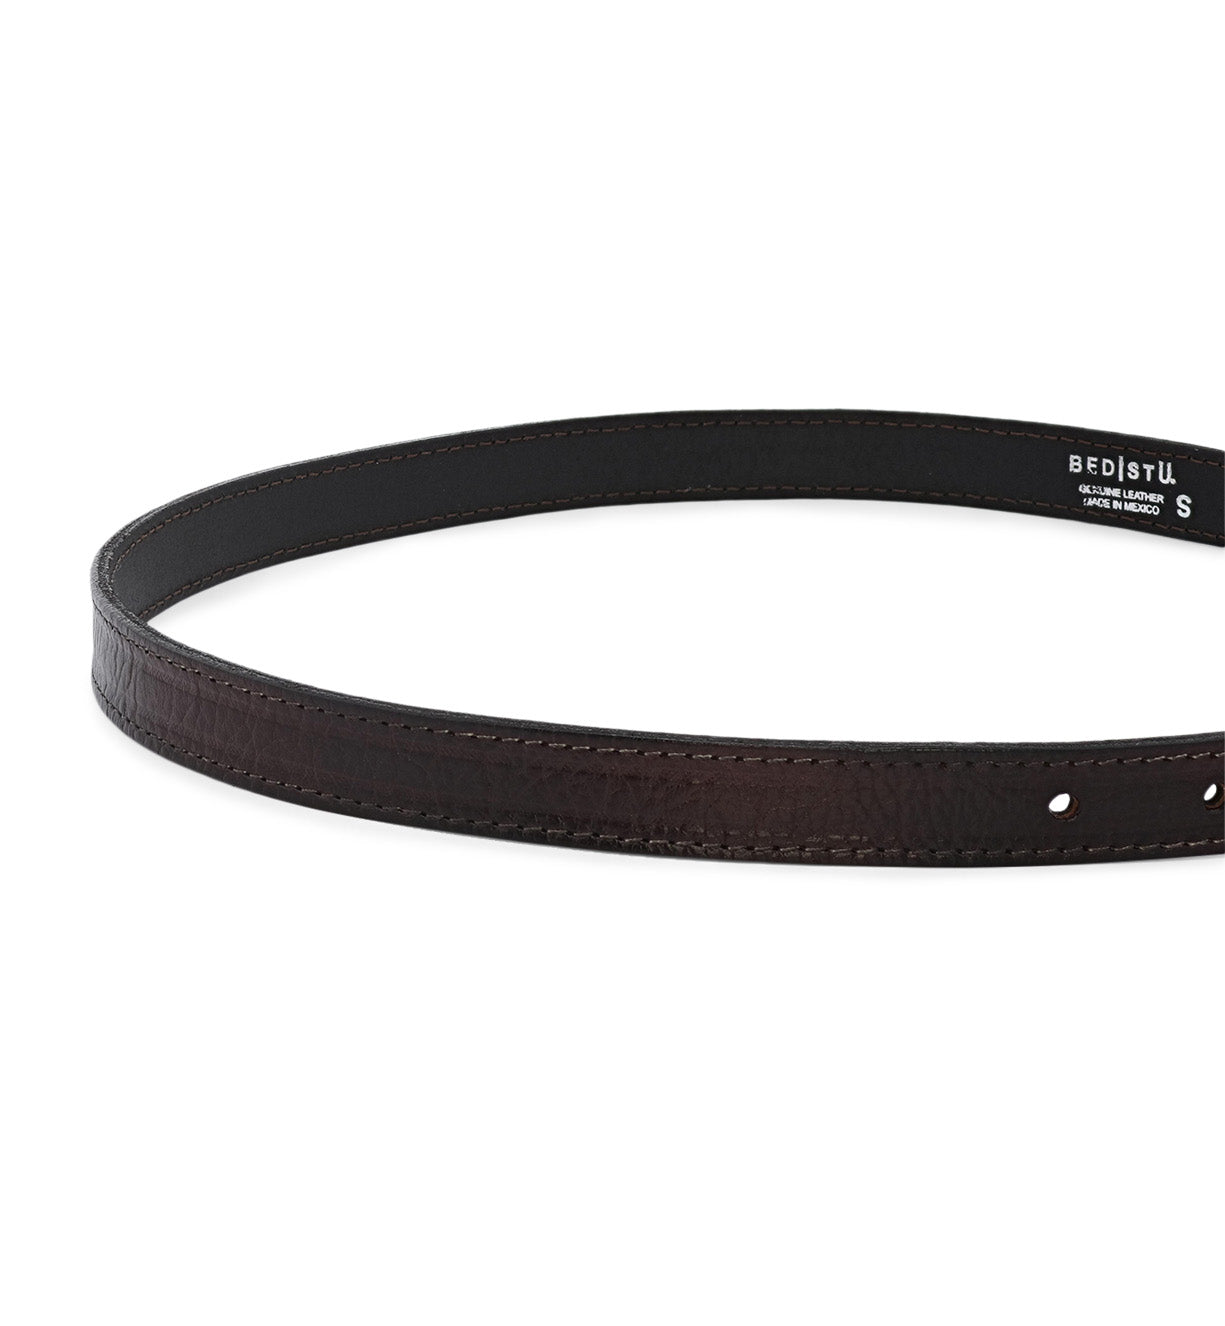 A Bed Stu Monae brown leather belt on a white background.